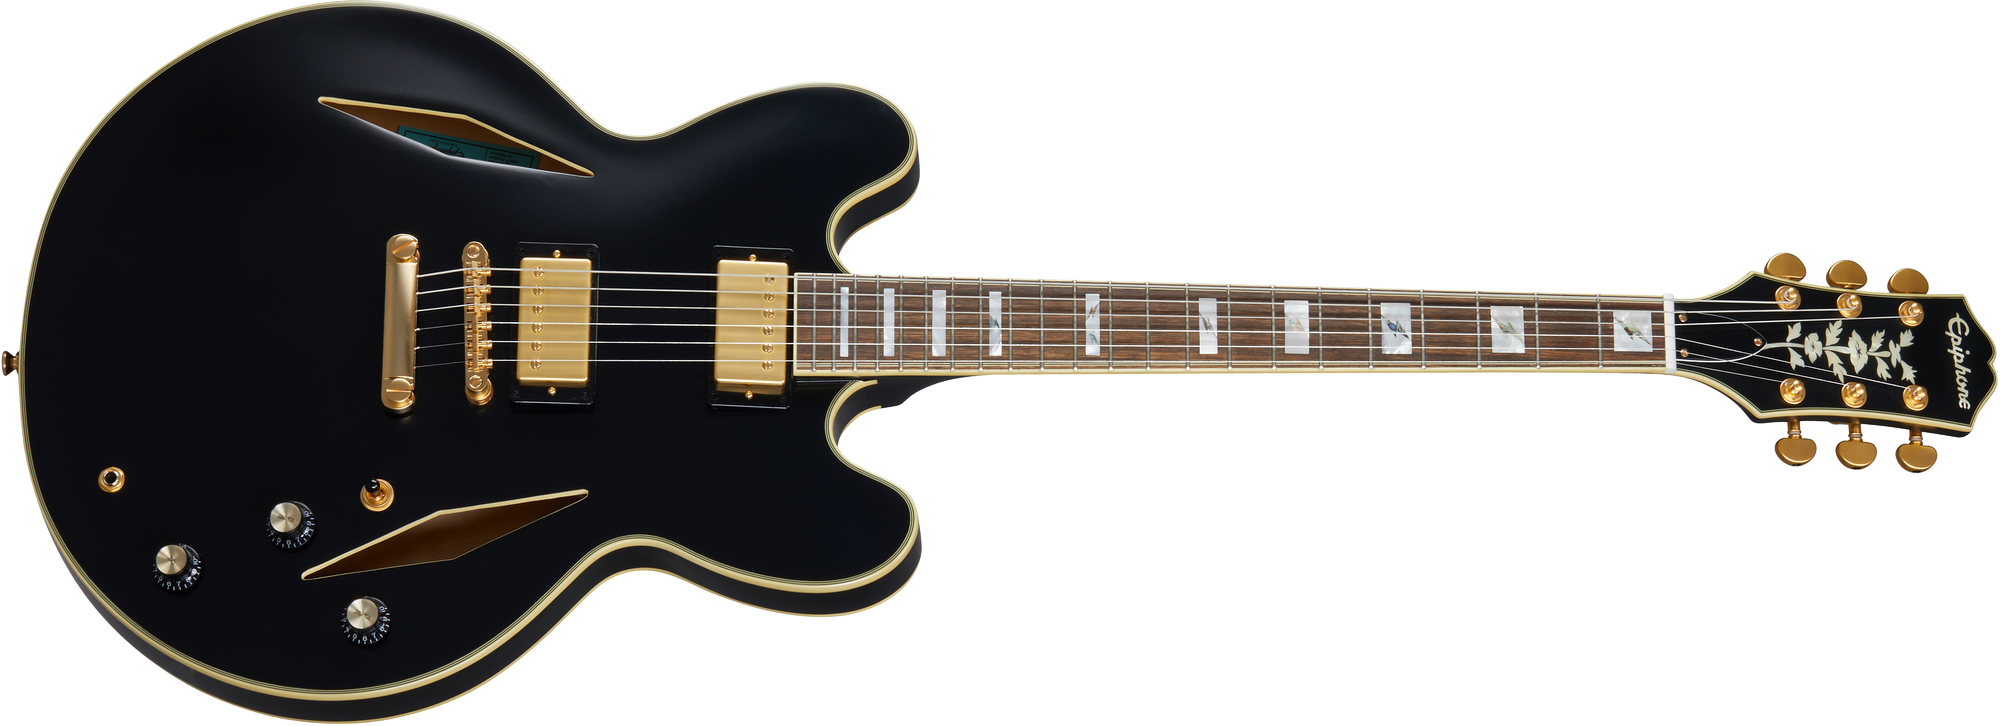 Epiphone Emily Wolfe Sheraton Stealth Black Aged Gloss El-Guitar